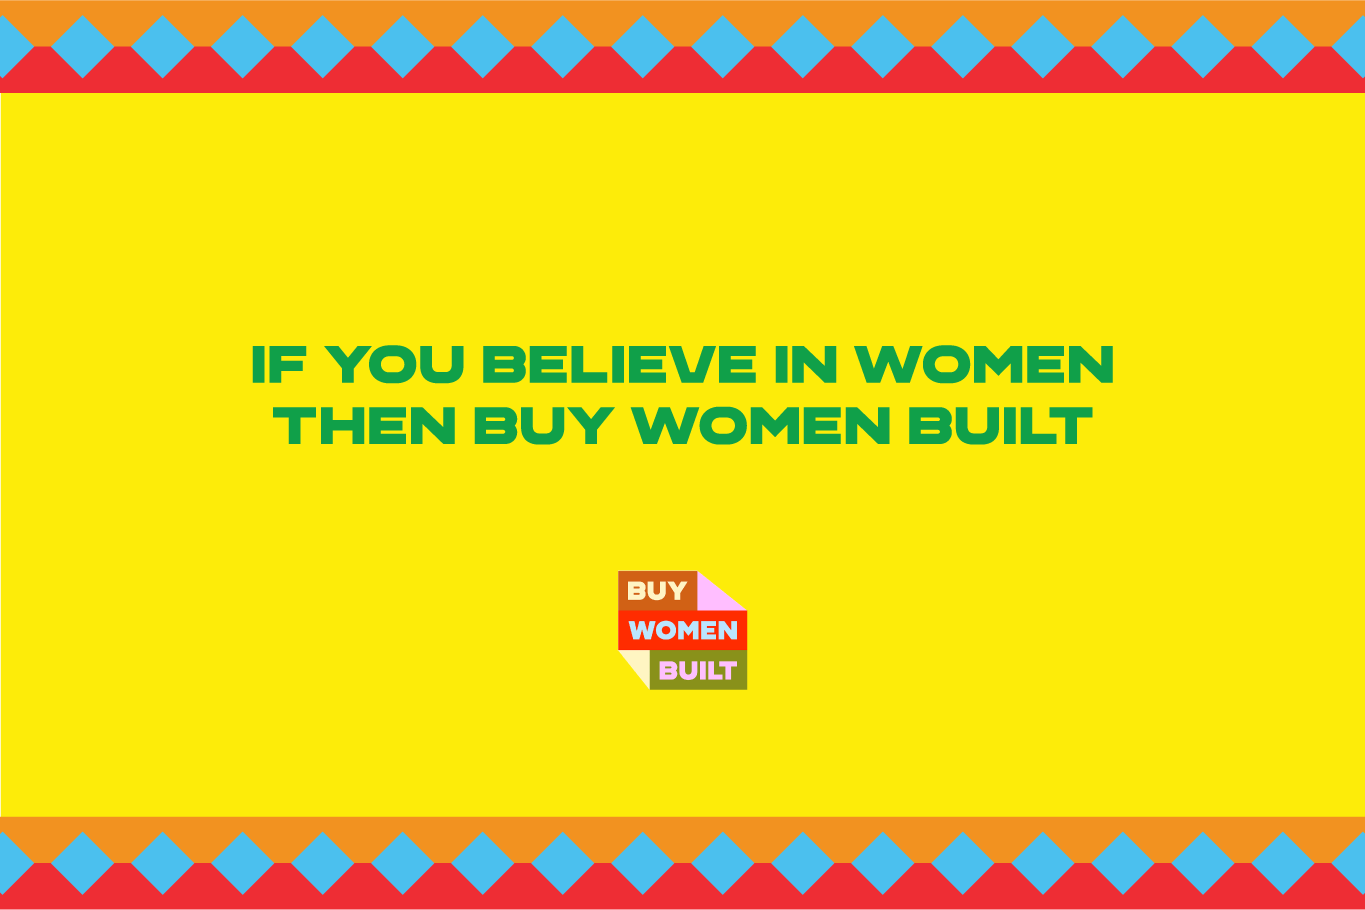 Image showing Buy Women Built pattern with quote